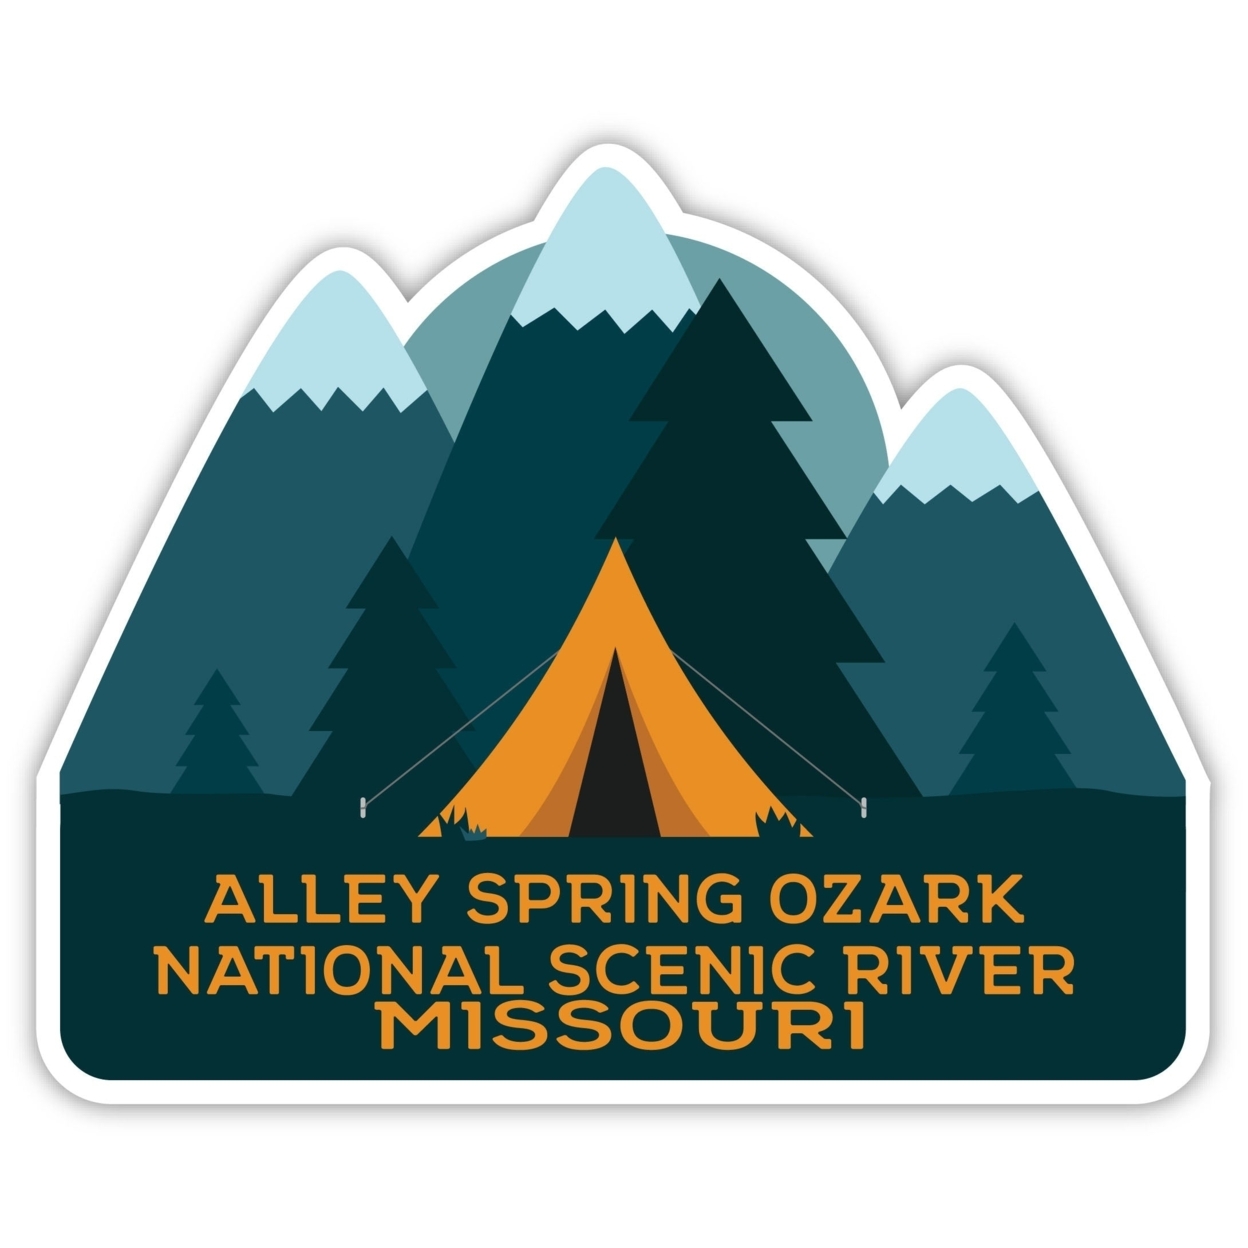 Alley Spring Ozark National Scenic River Missouri Souvenir Decorative Stickers (Choose Theme And Size) - 4-Pack, 10-Inch, Tent